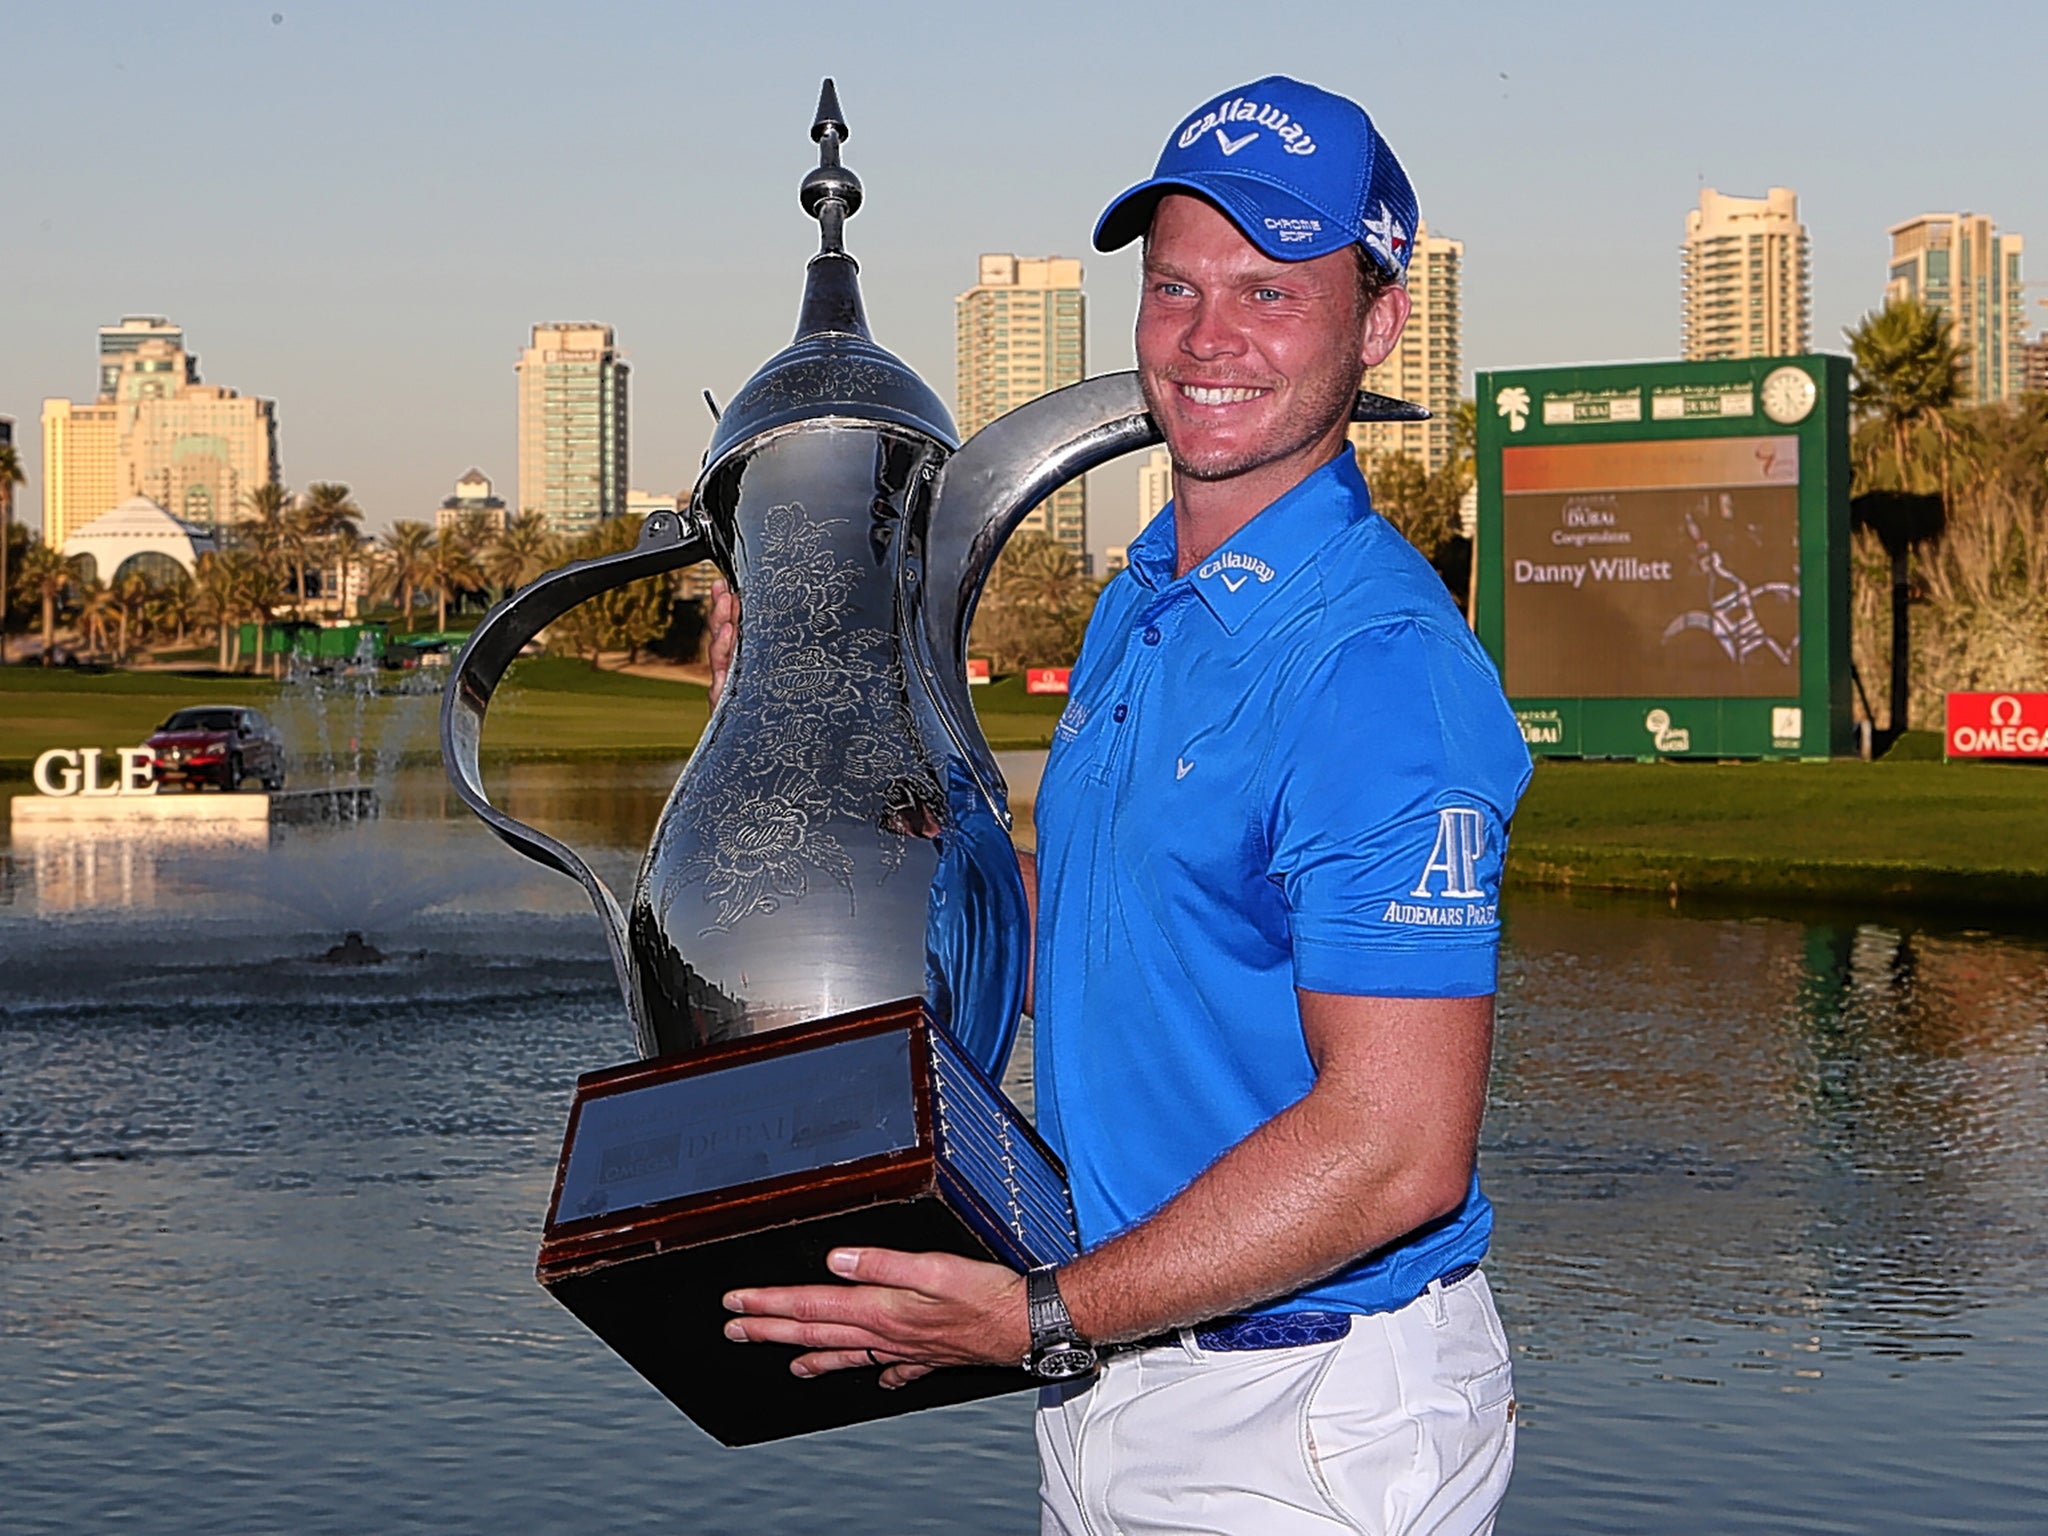 Danny Willett gets to grips with the trophy after his victory at the Dubai Desert Classic